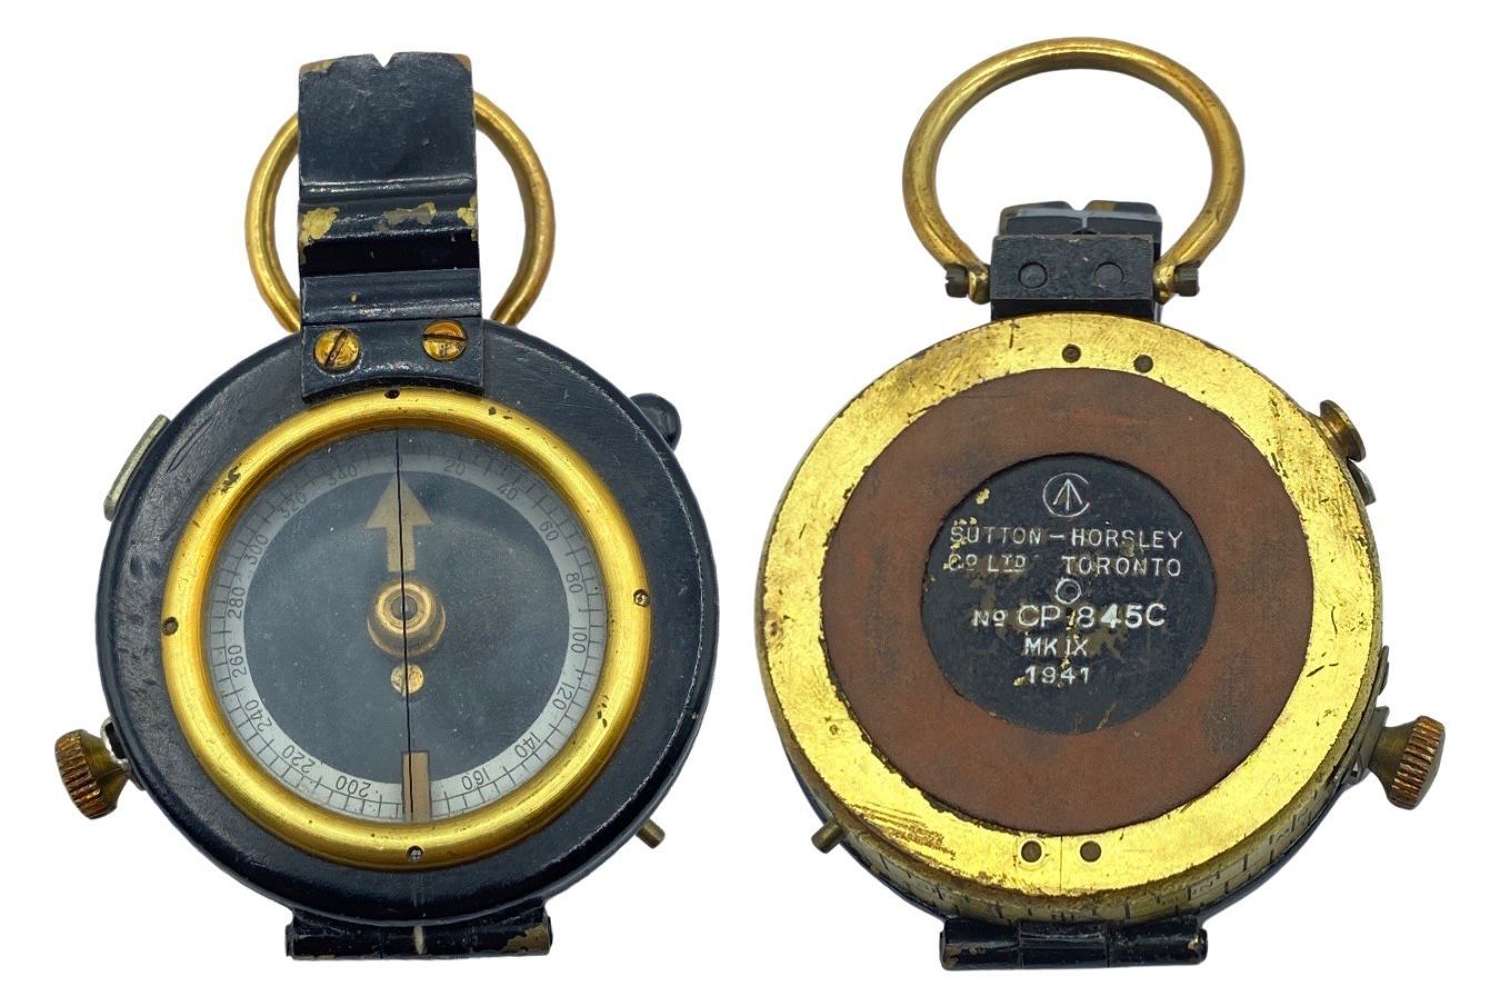 WW2 Canadian MK.IX 1941 Prismatic Marching Compass By Sutton-Horsley